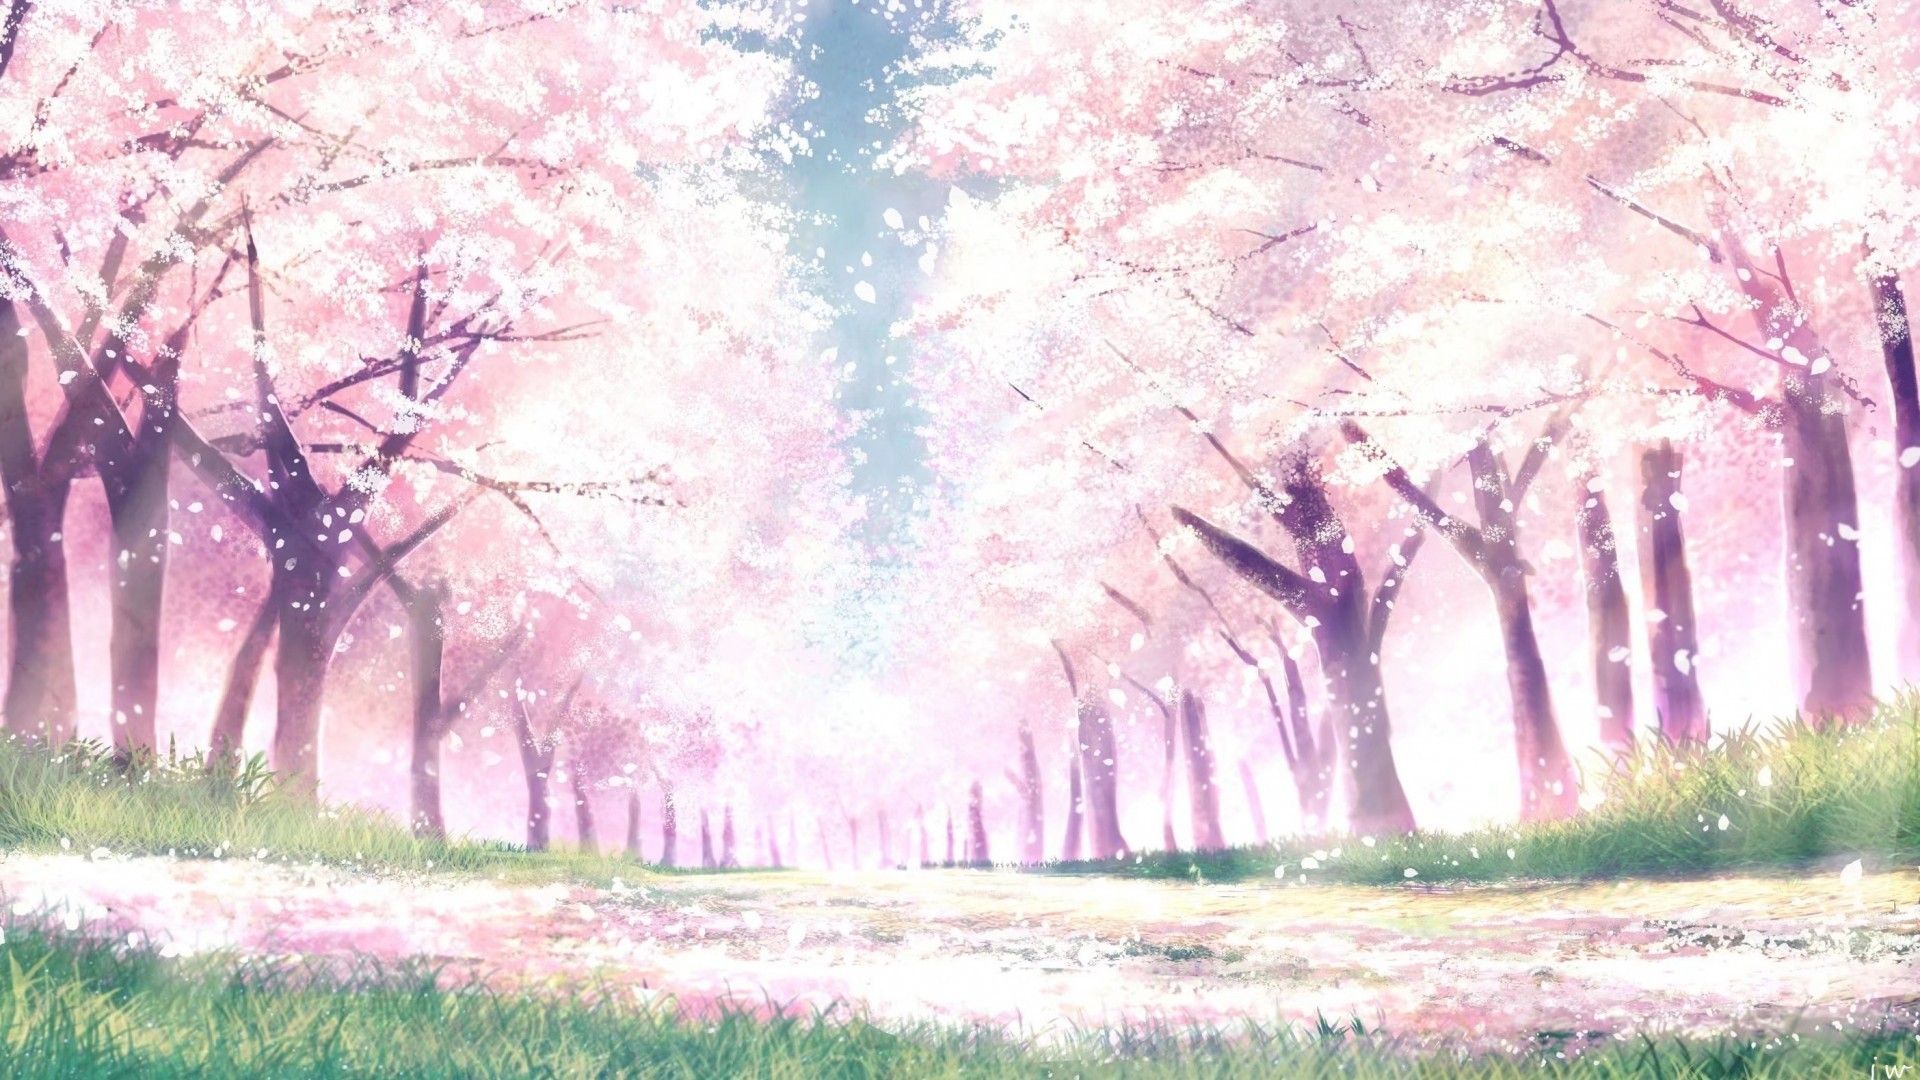 Anime Cherry Blossom Landscape Wallpapers - Wallpaper Cave